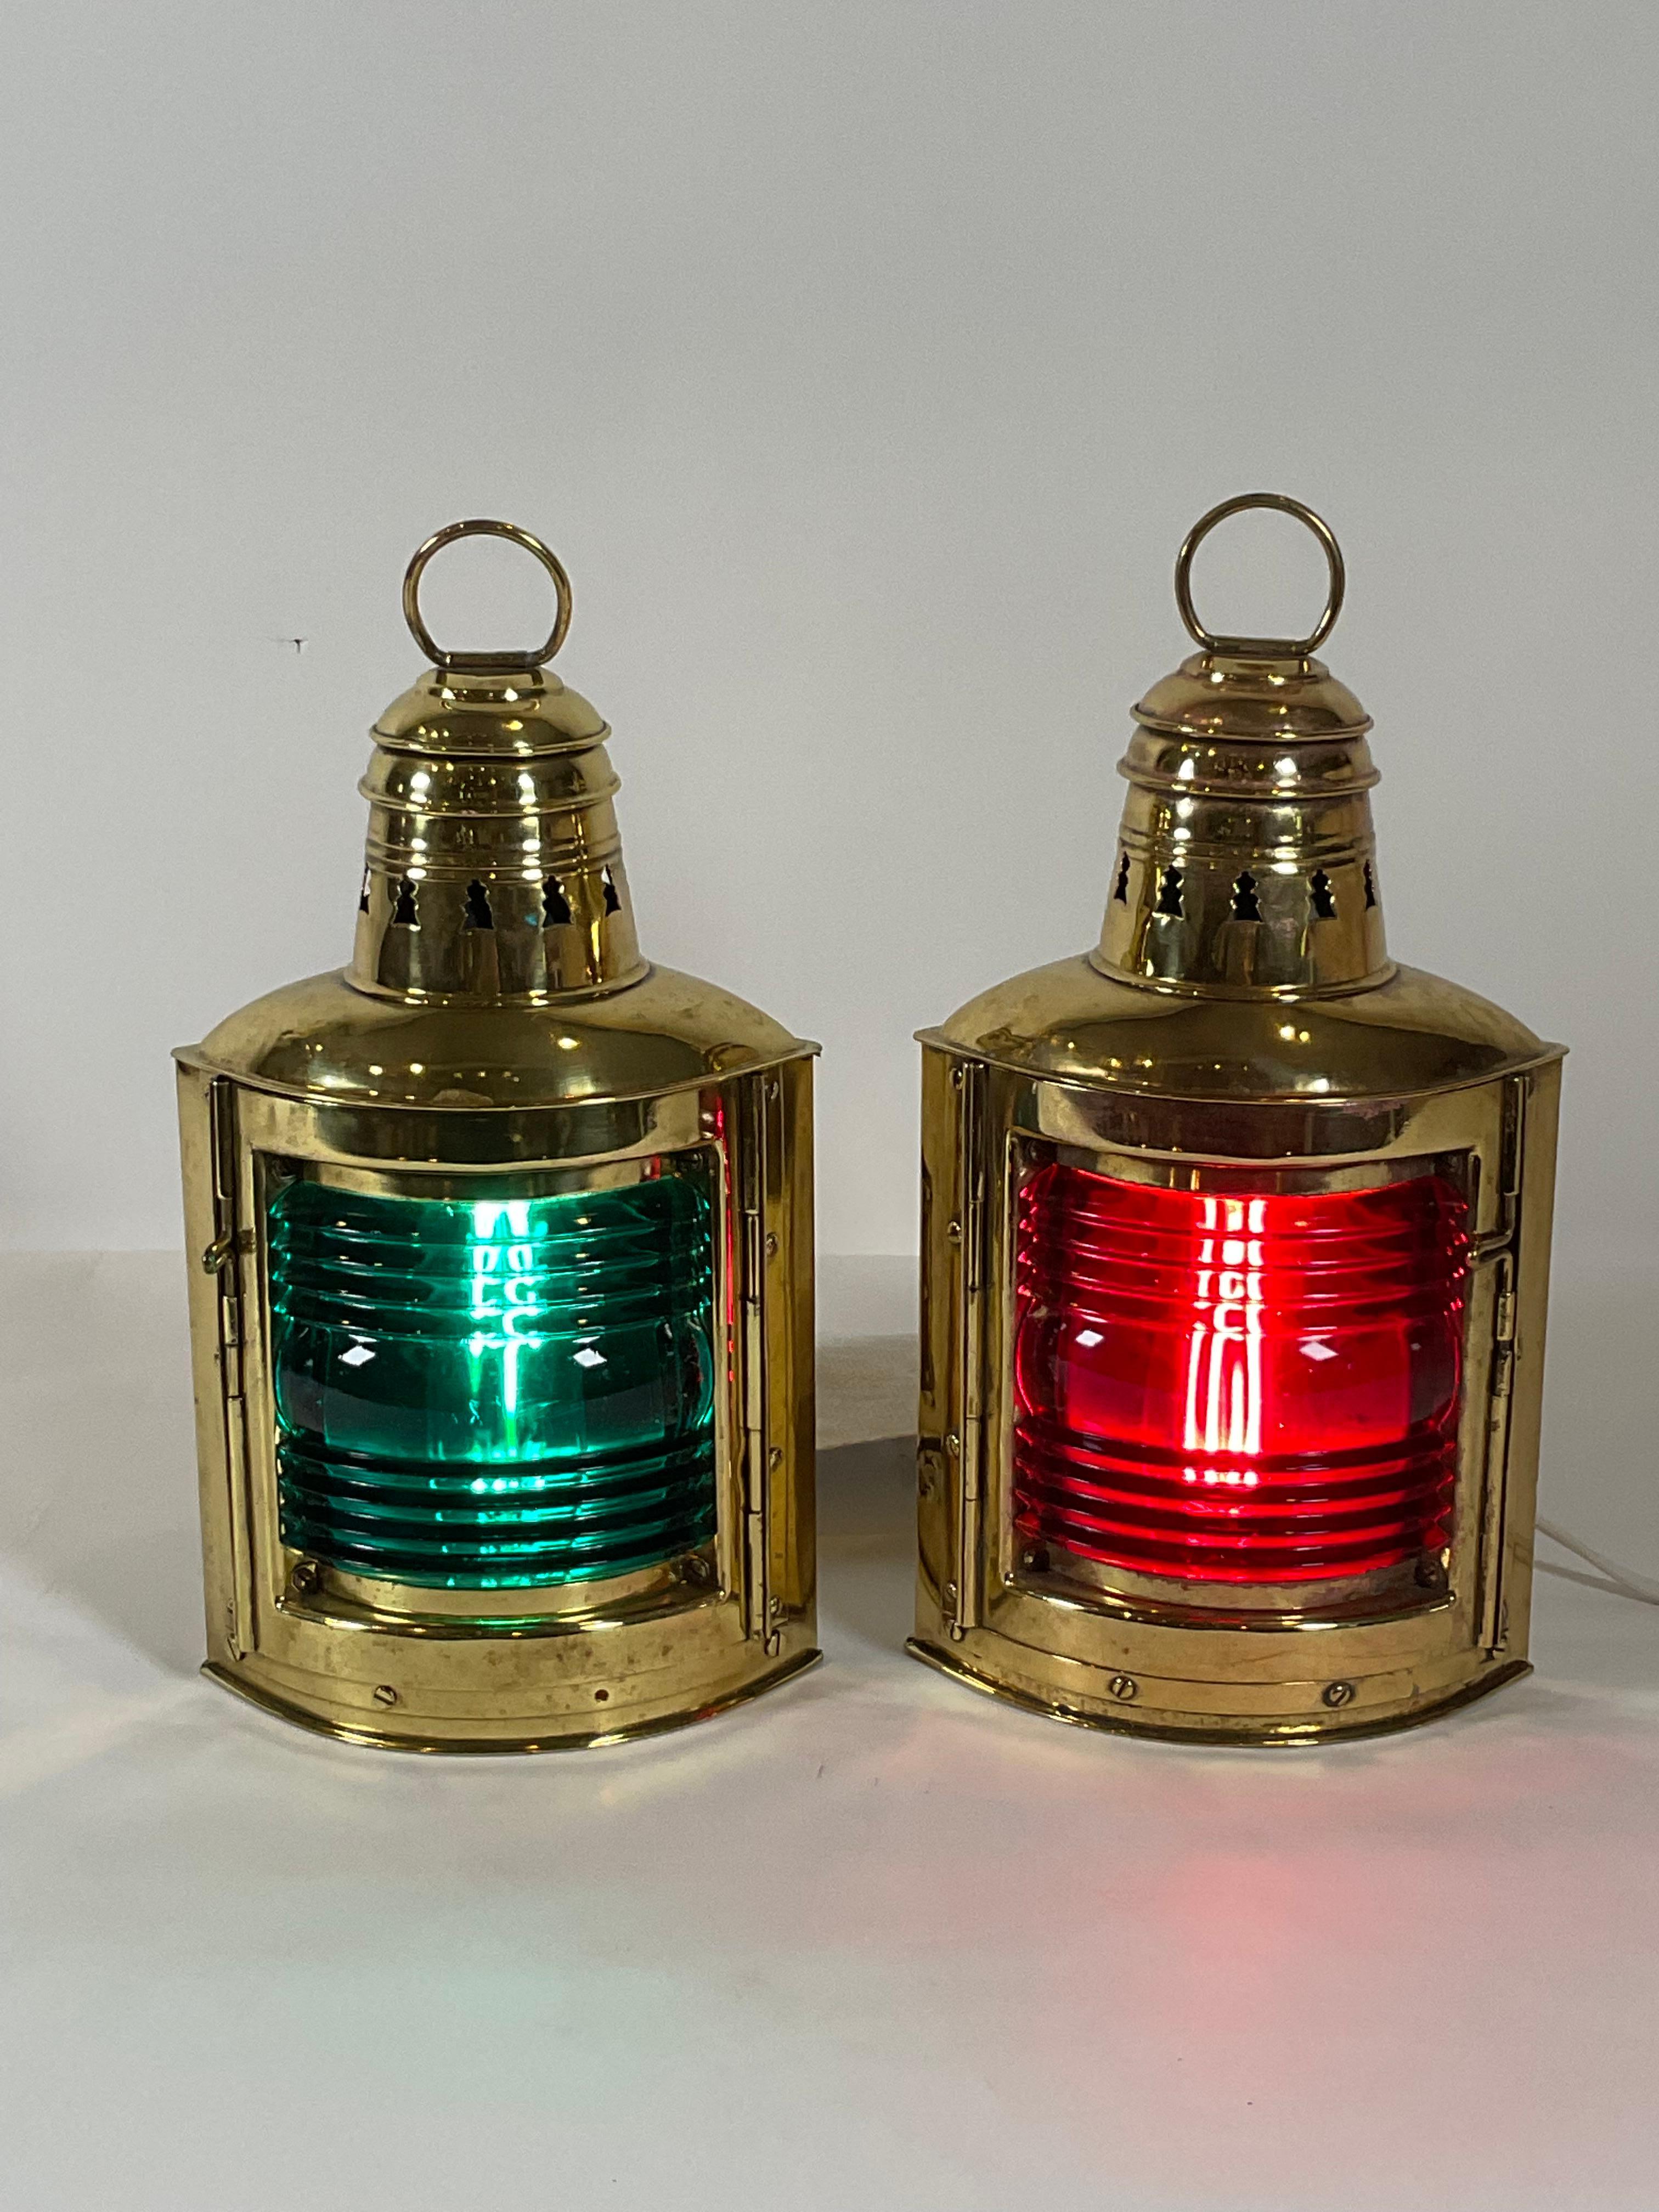 Pair of Solid Brass Boat Lanterns by Perko In Good Condition For Sale In Norwell, MA